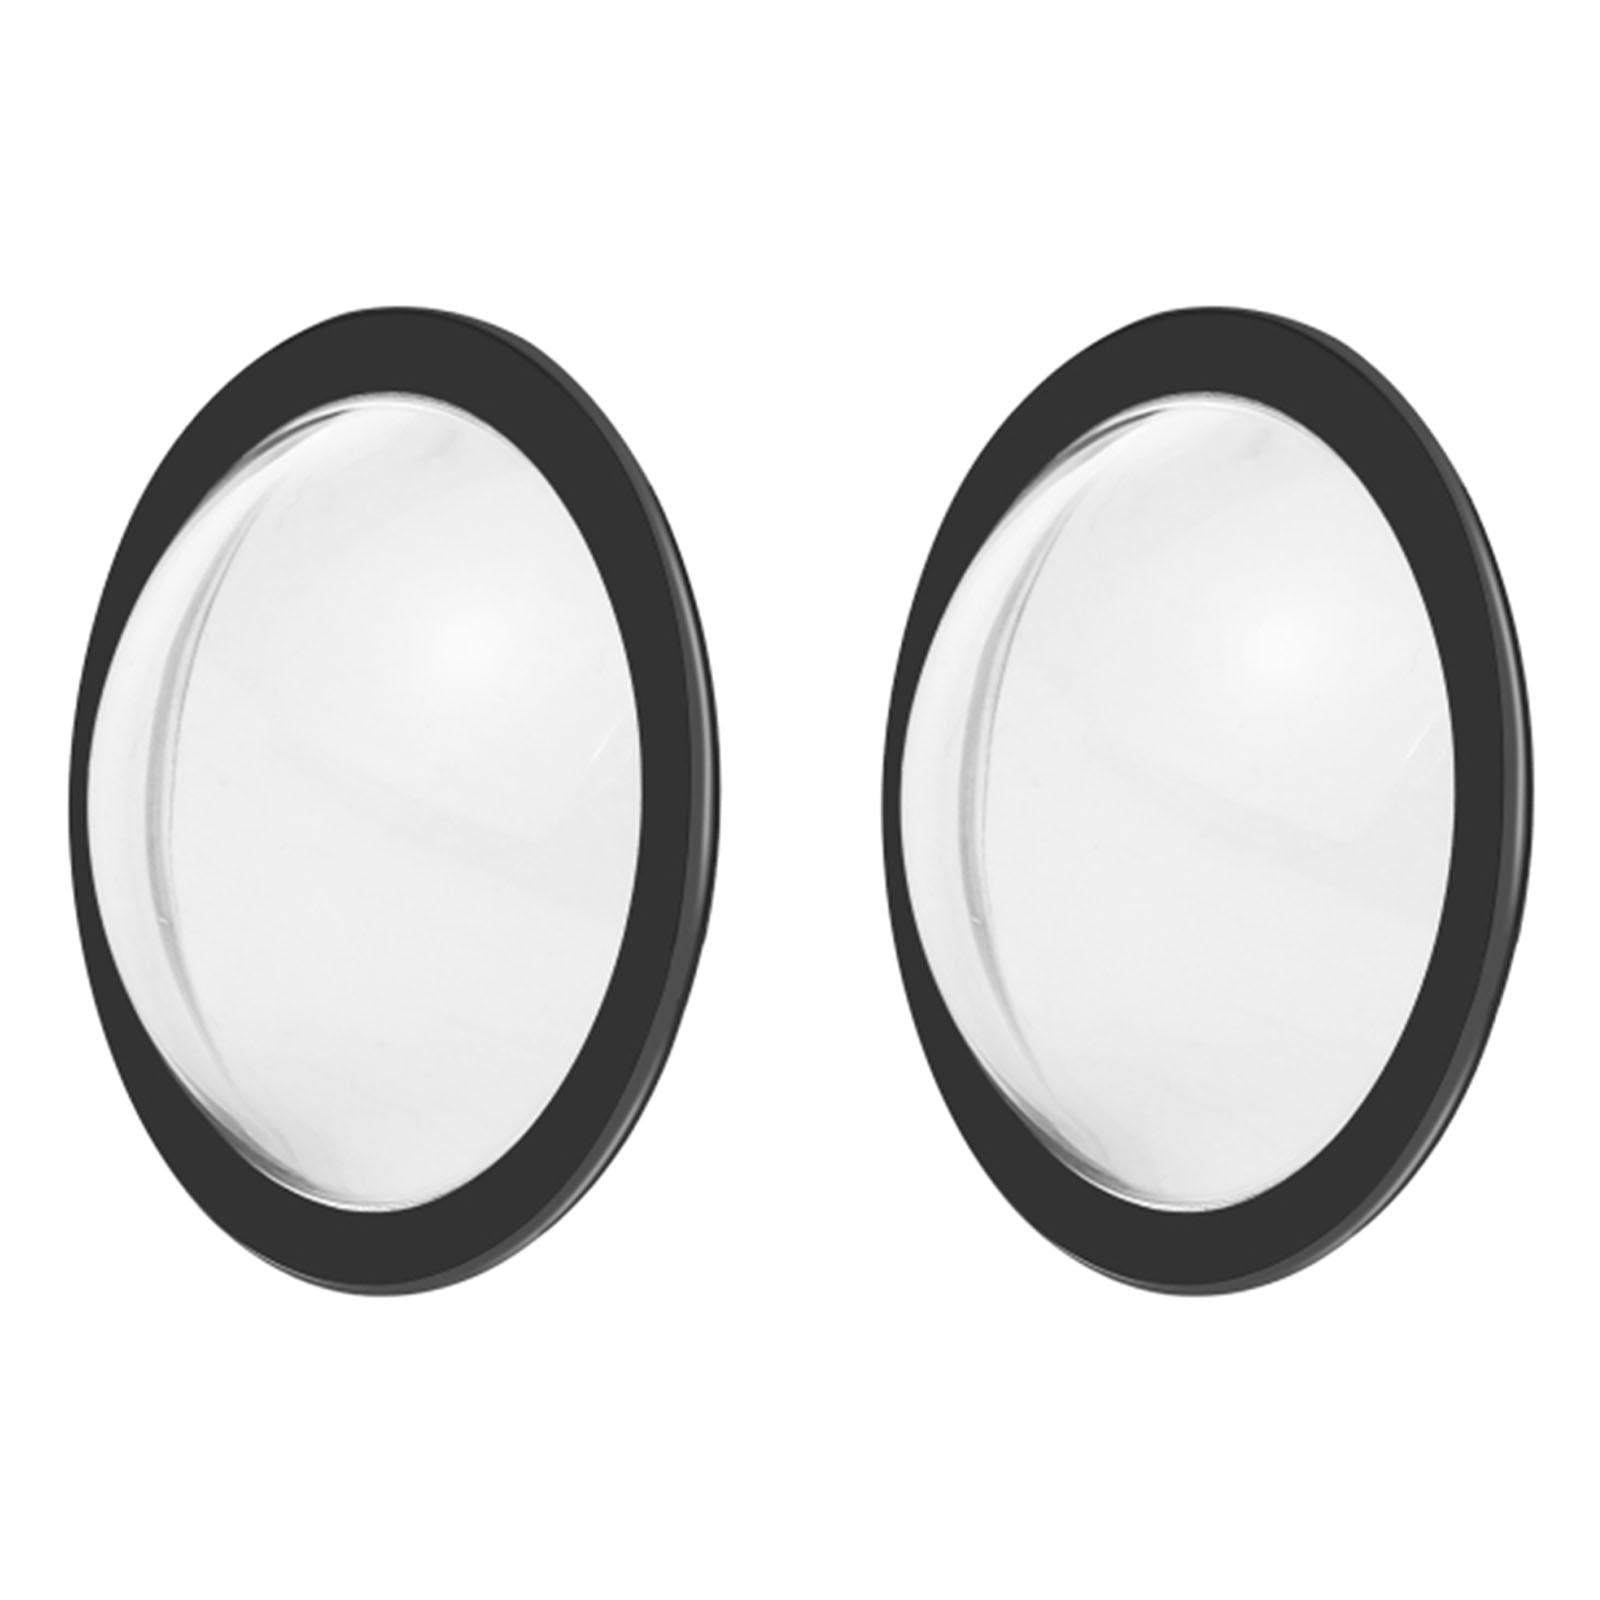 Lens Guards guard Protective/ Anti Scratch for SC2 S V